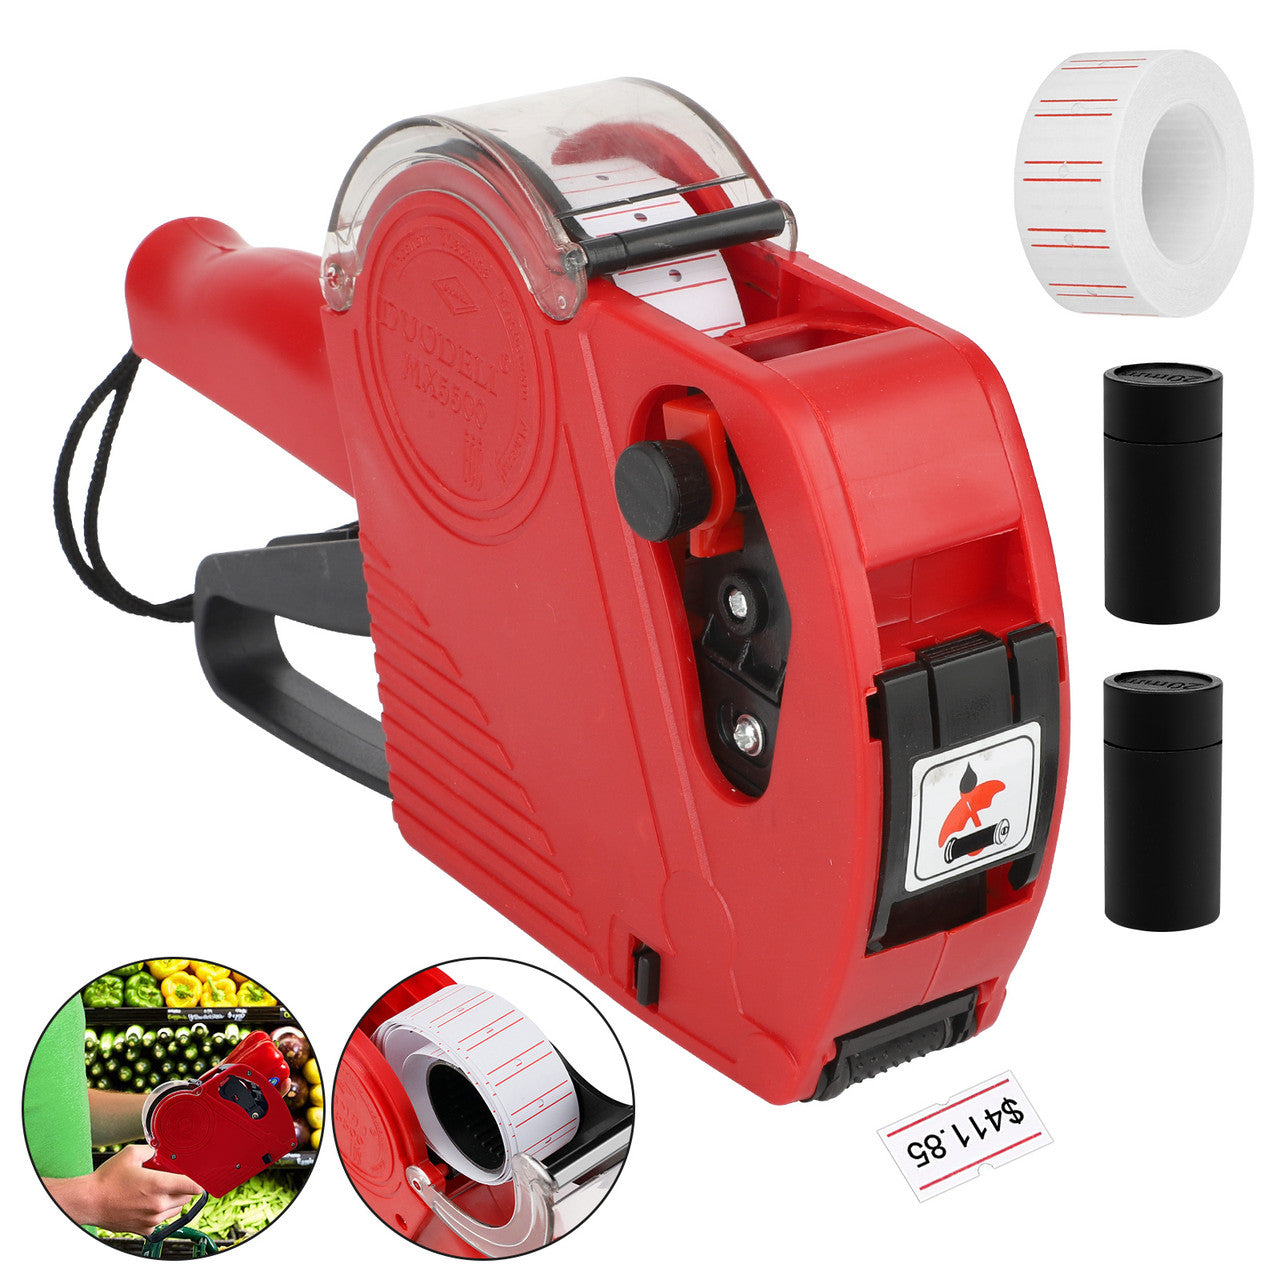 8 Digits Price Tagging Machine With Cover - Single Row printing,use for your small business or retail store (Red)